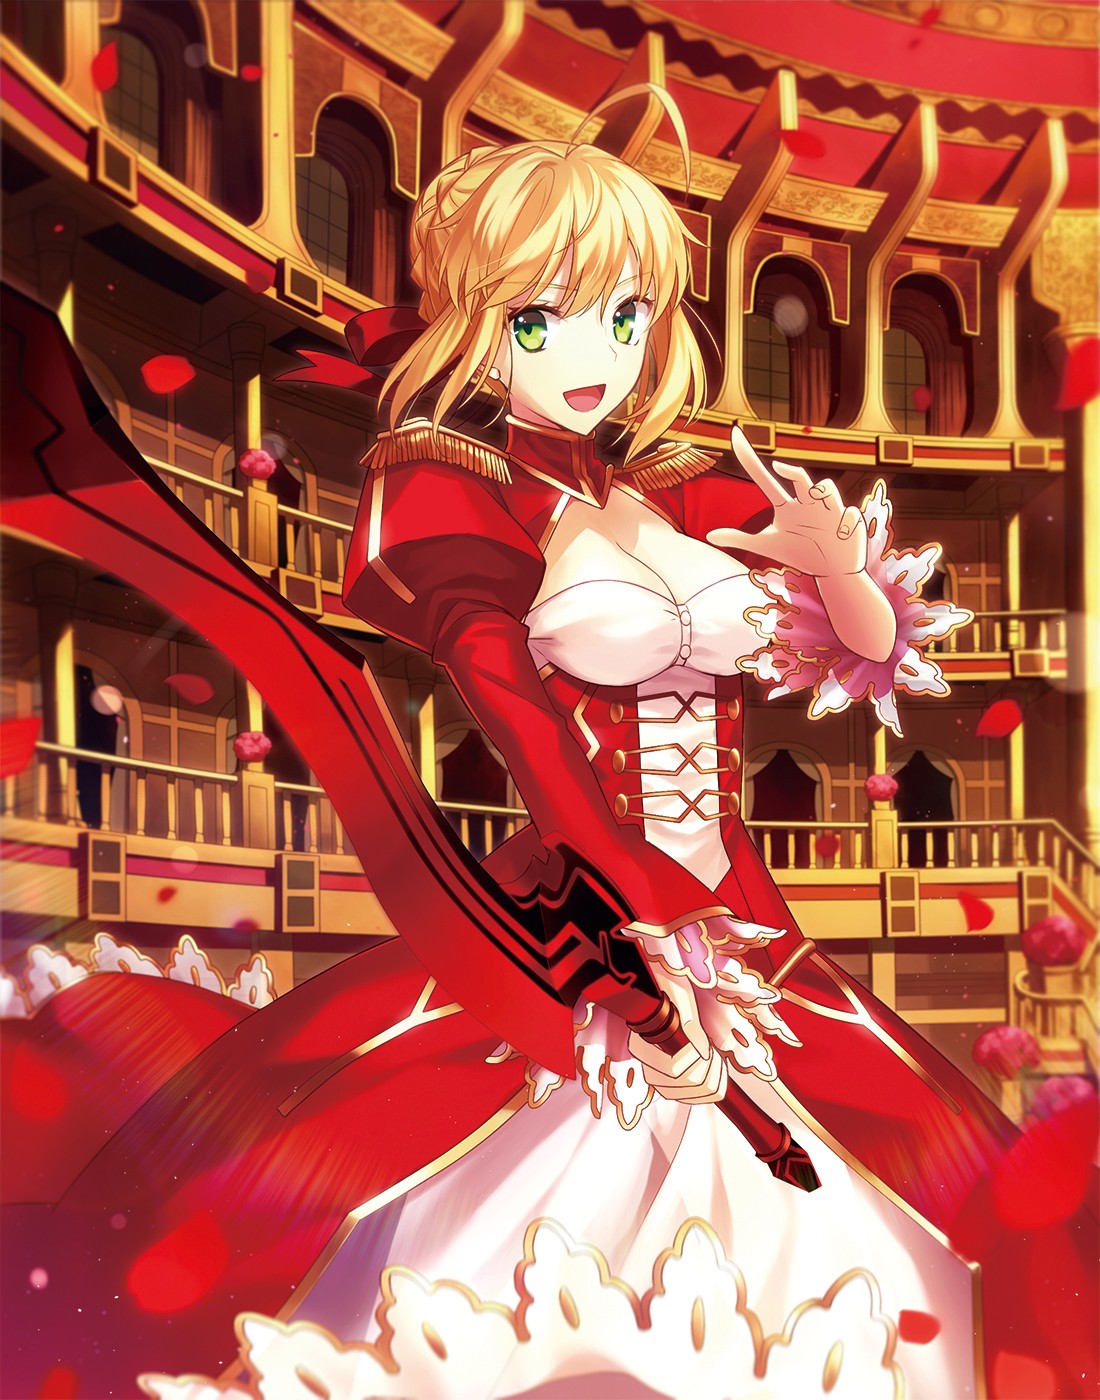 Anime 1100x1400 Fate series anime girls Nero Claudius boobs open mouth blonde sword red dress women with swords dress anime